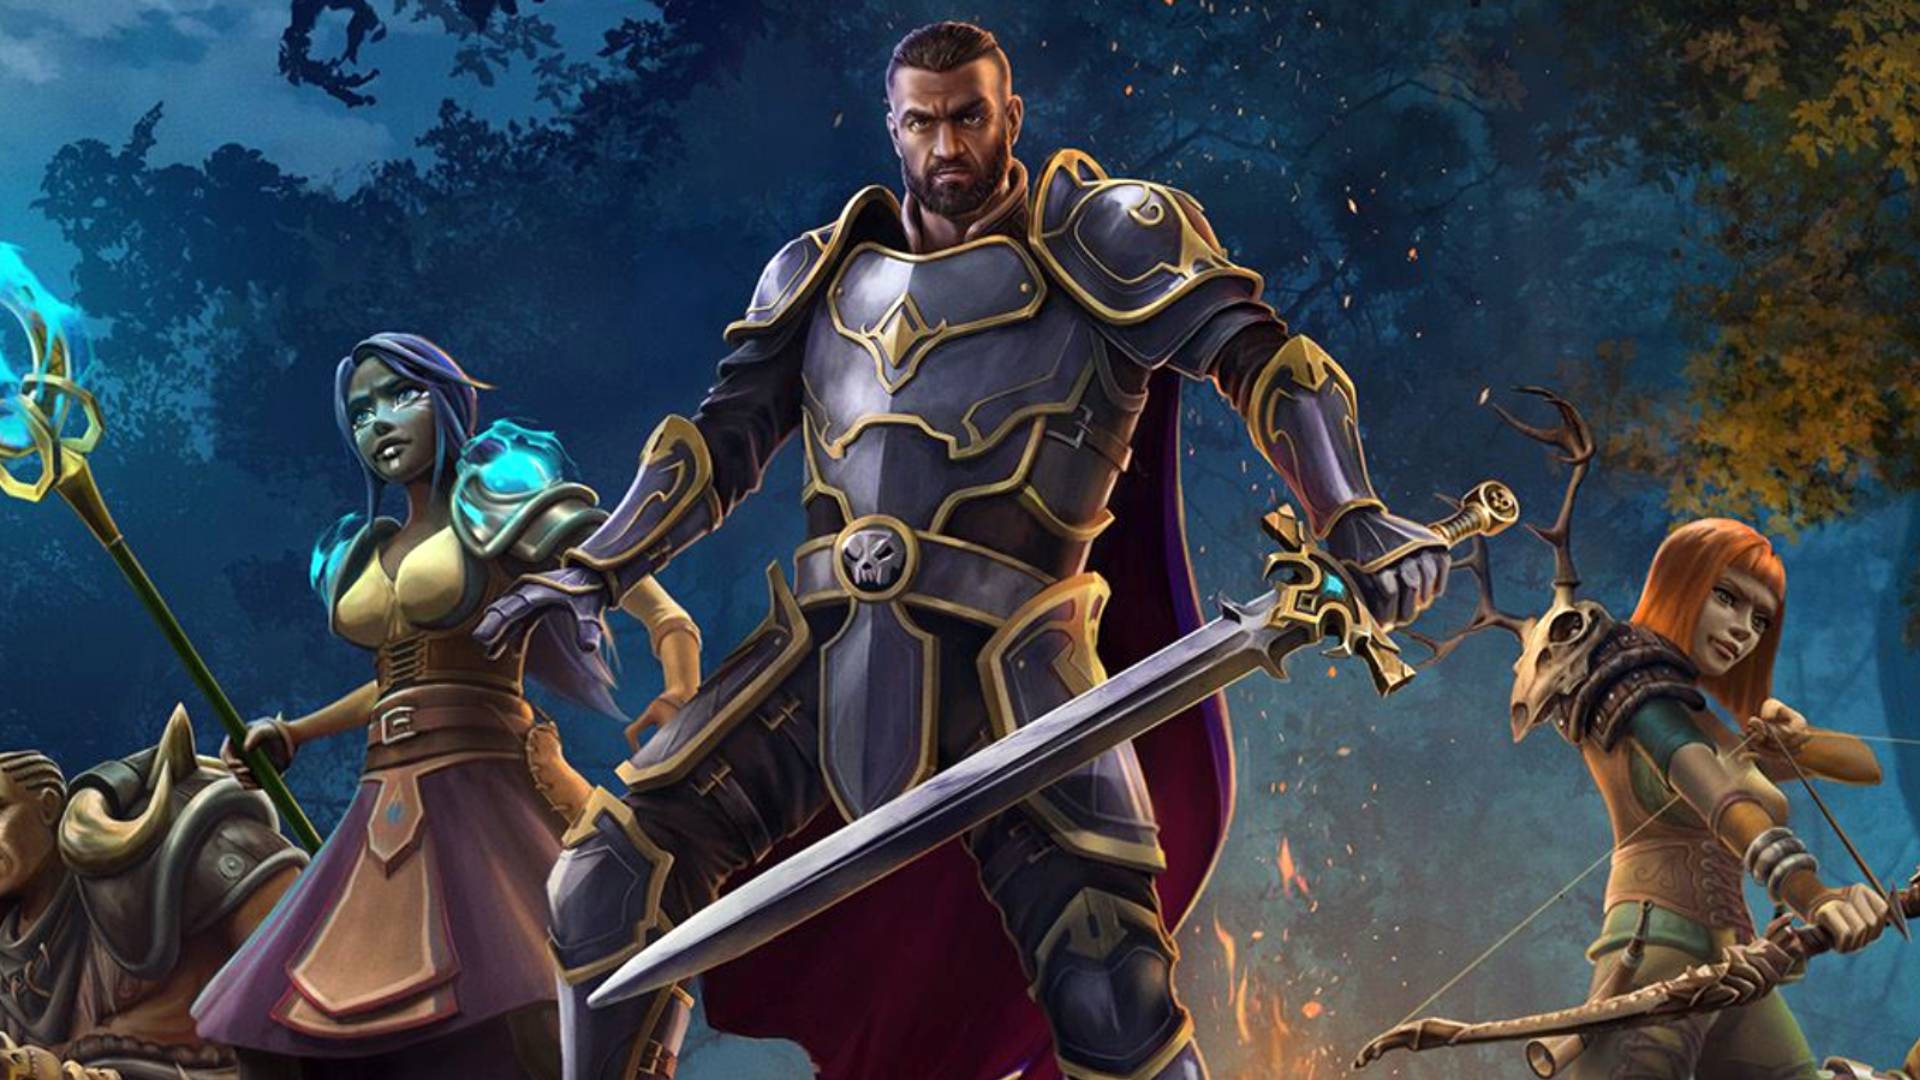 If you've finished Baldur's Gate 3, this new RPG is what you need